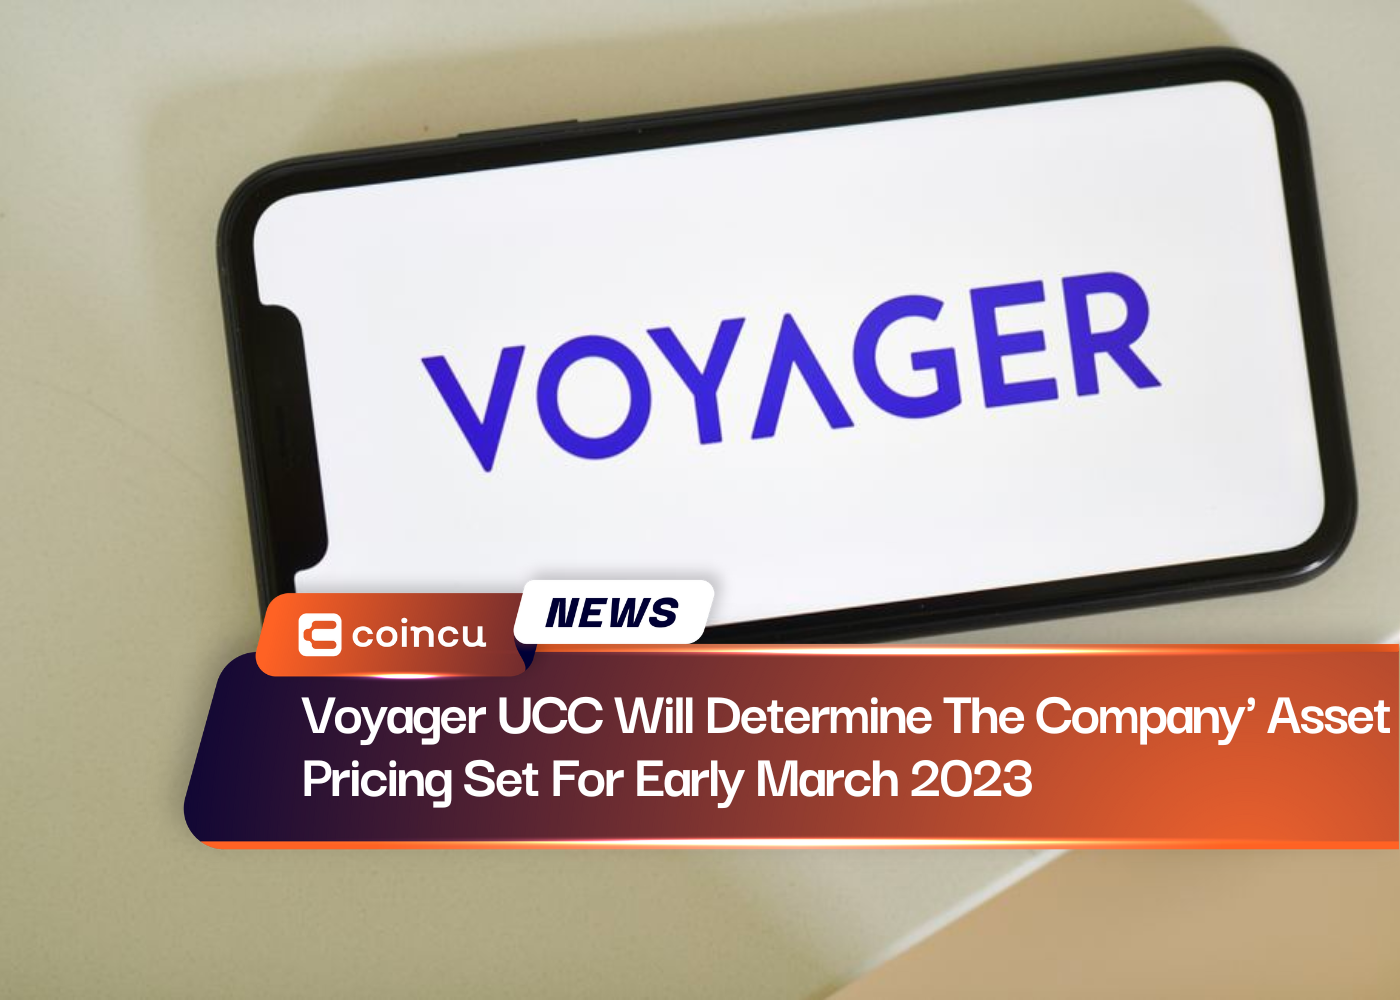 Voyager UCC Will Determine The Company' Asset Pricing Set For Early March 2023